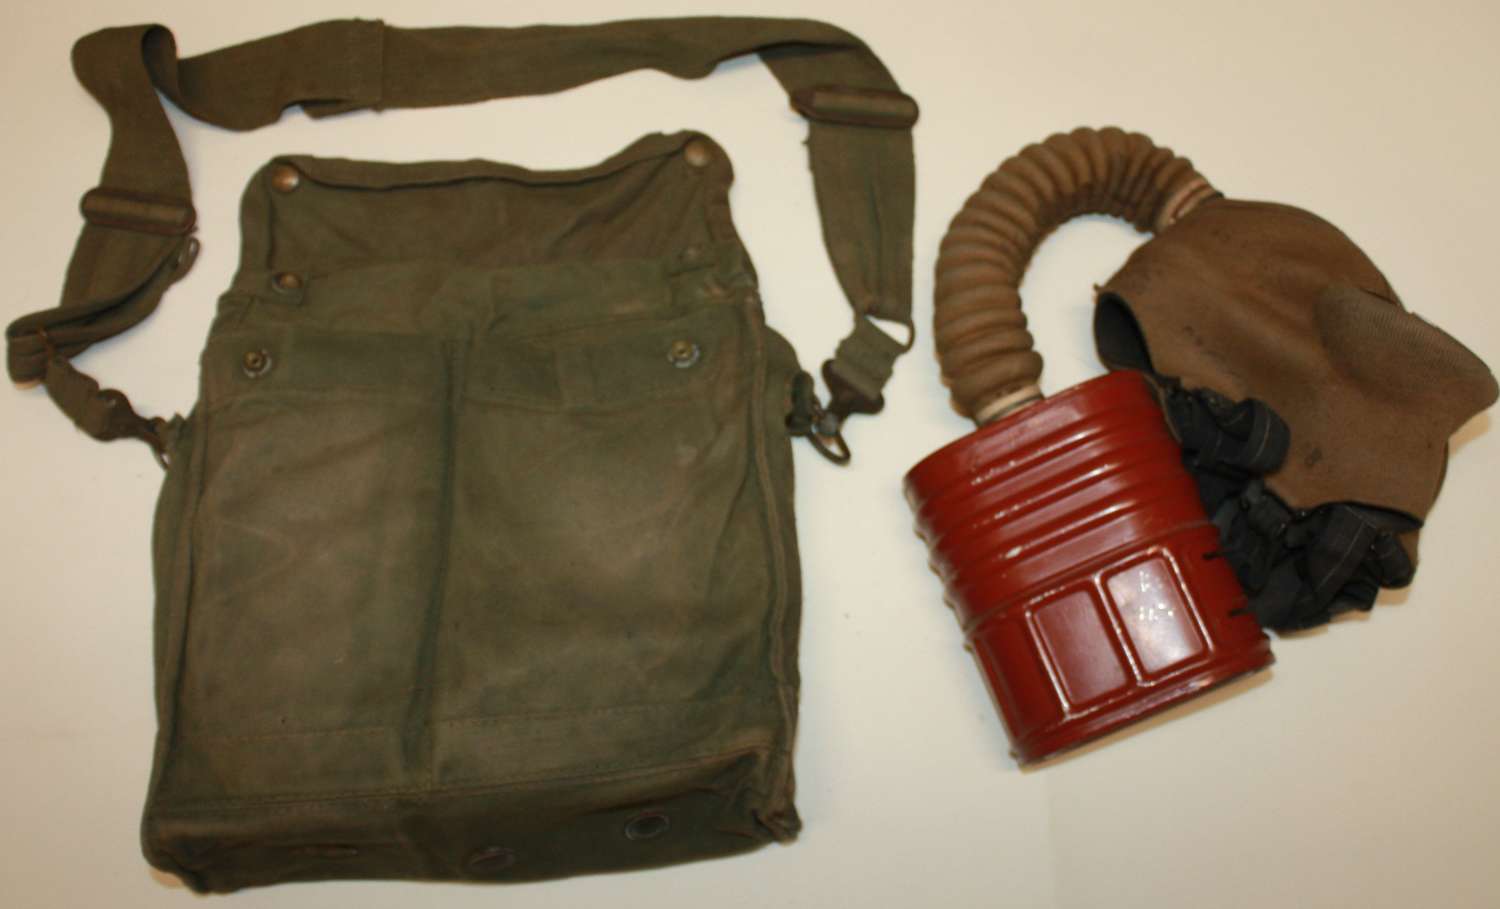 A GOOD USED 1940 DATED BRITISH GAS MASK AND BAG